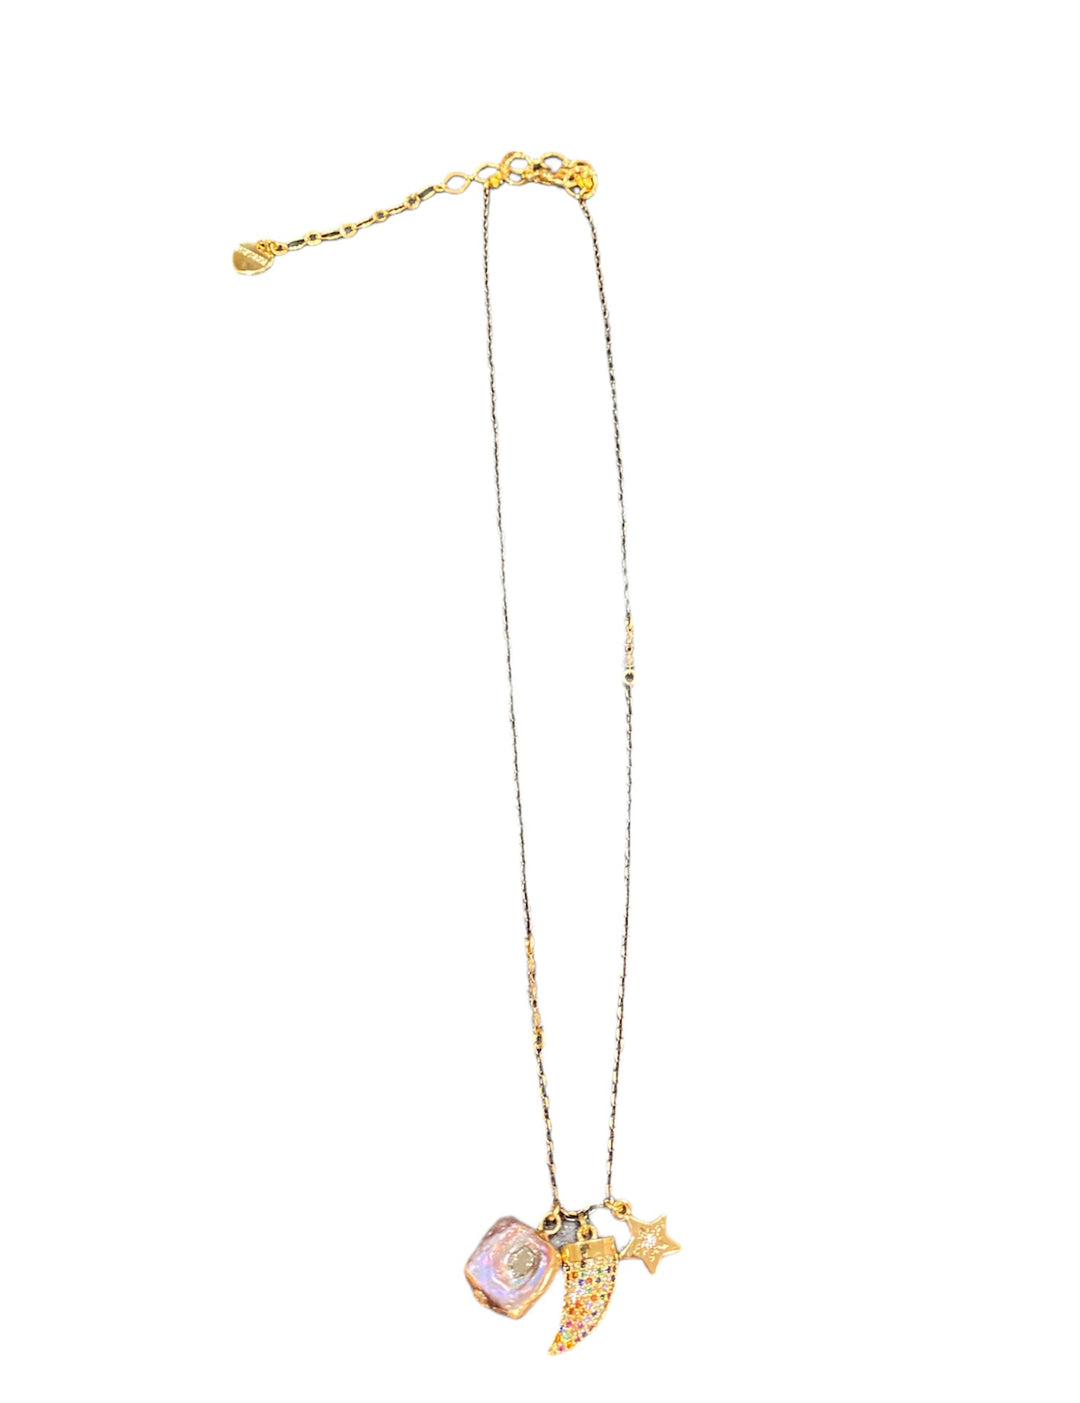 HORN STAR MULTI CHARM  NECKLACE - Kingfisher Road - Online Boutique